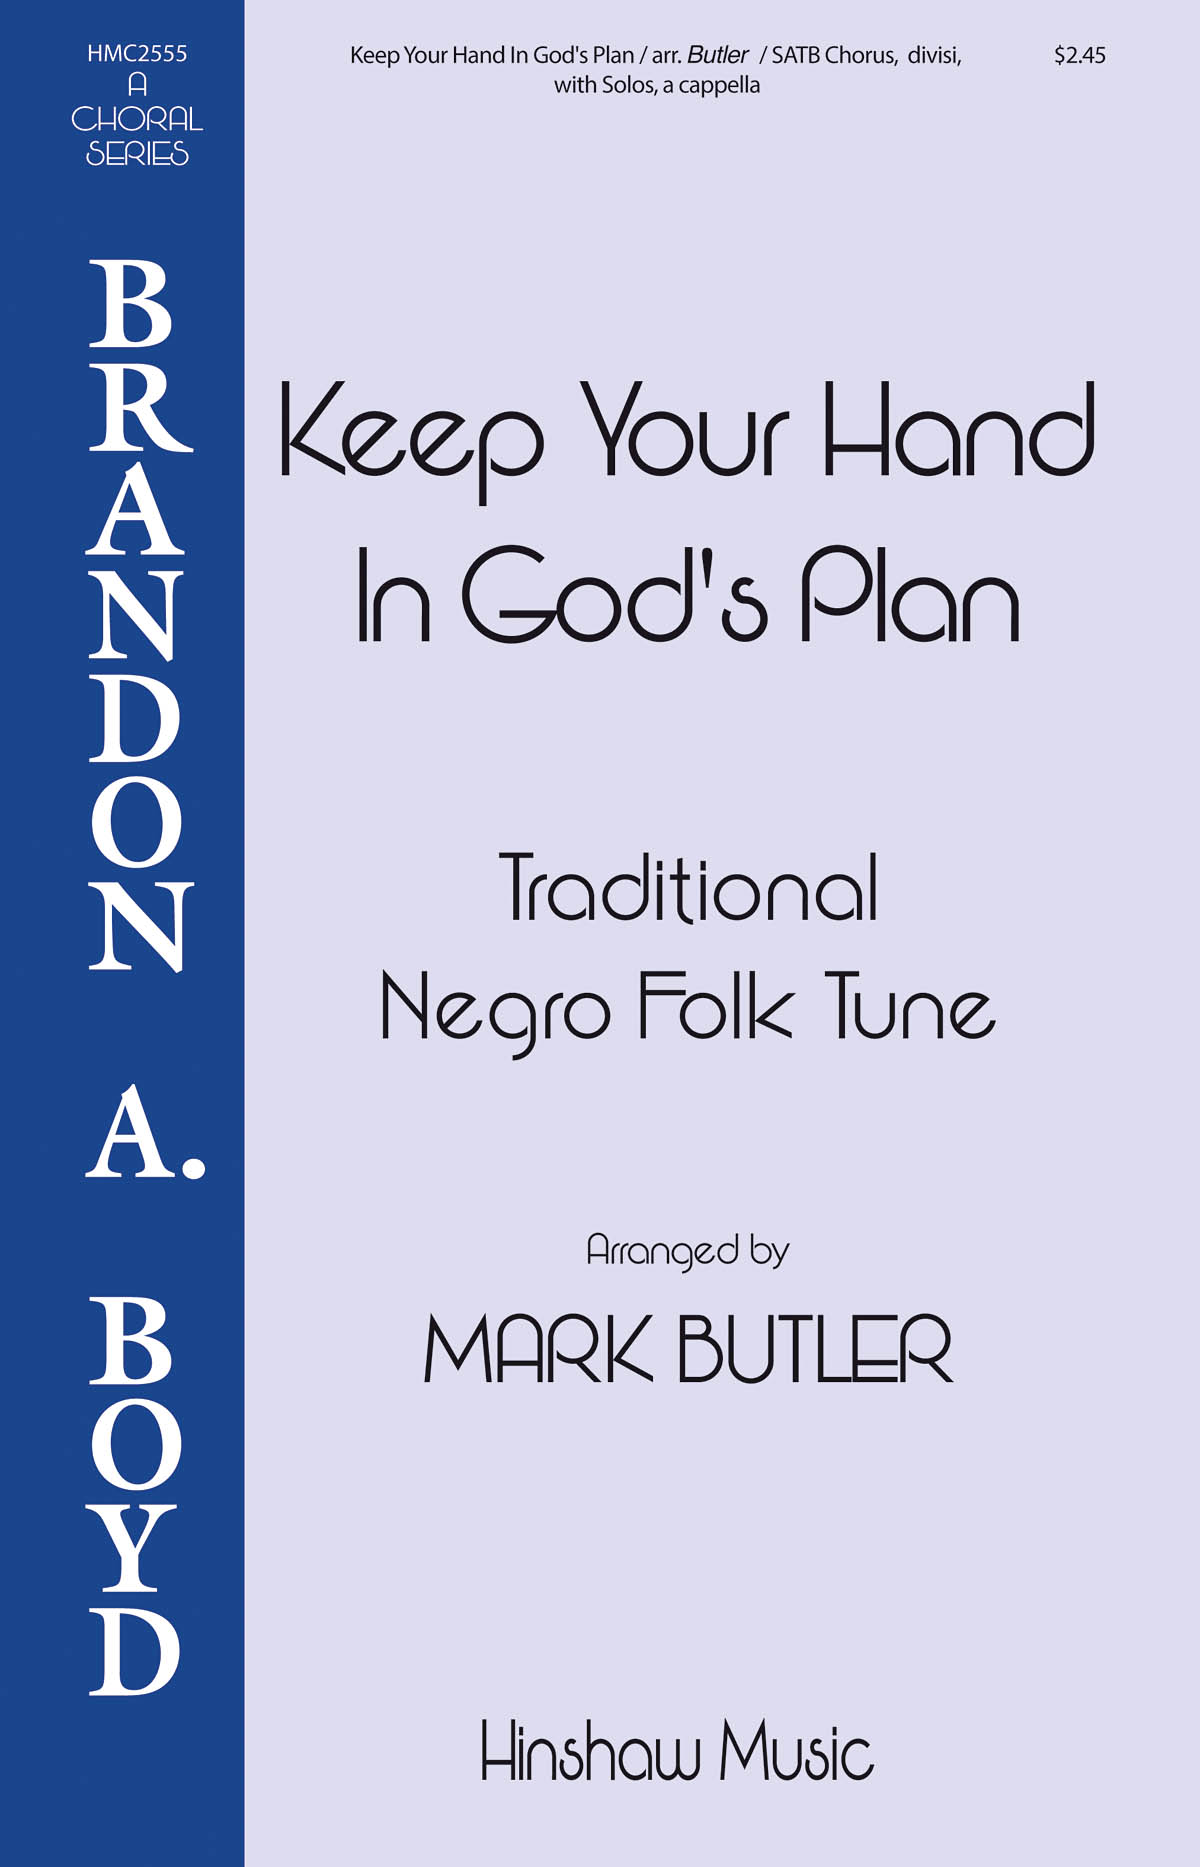 Keep Your Hand in God's Hand: Mixed Choir a Cappella: Vocal Score